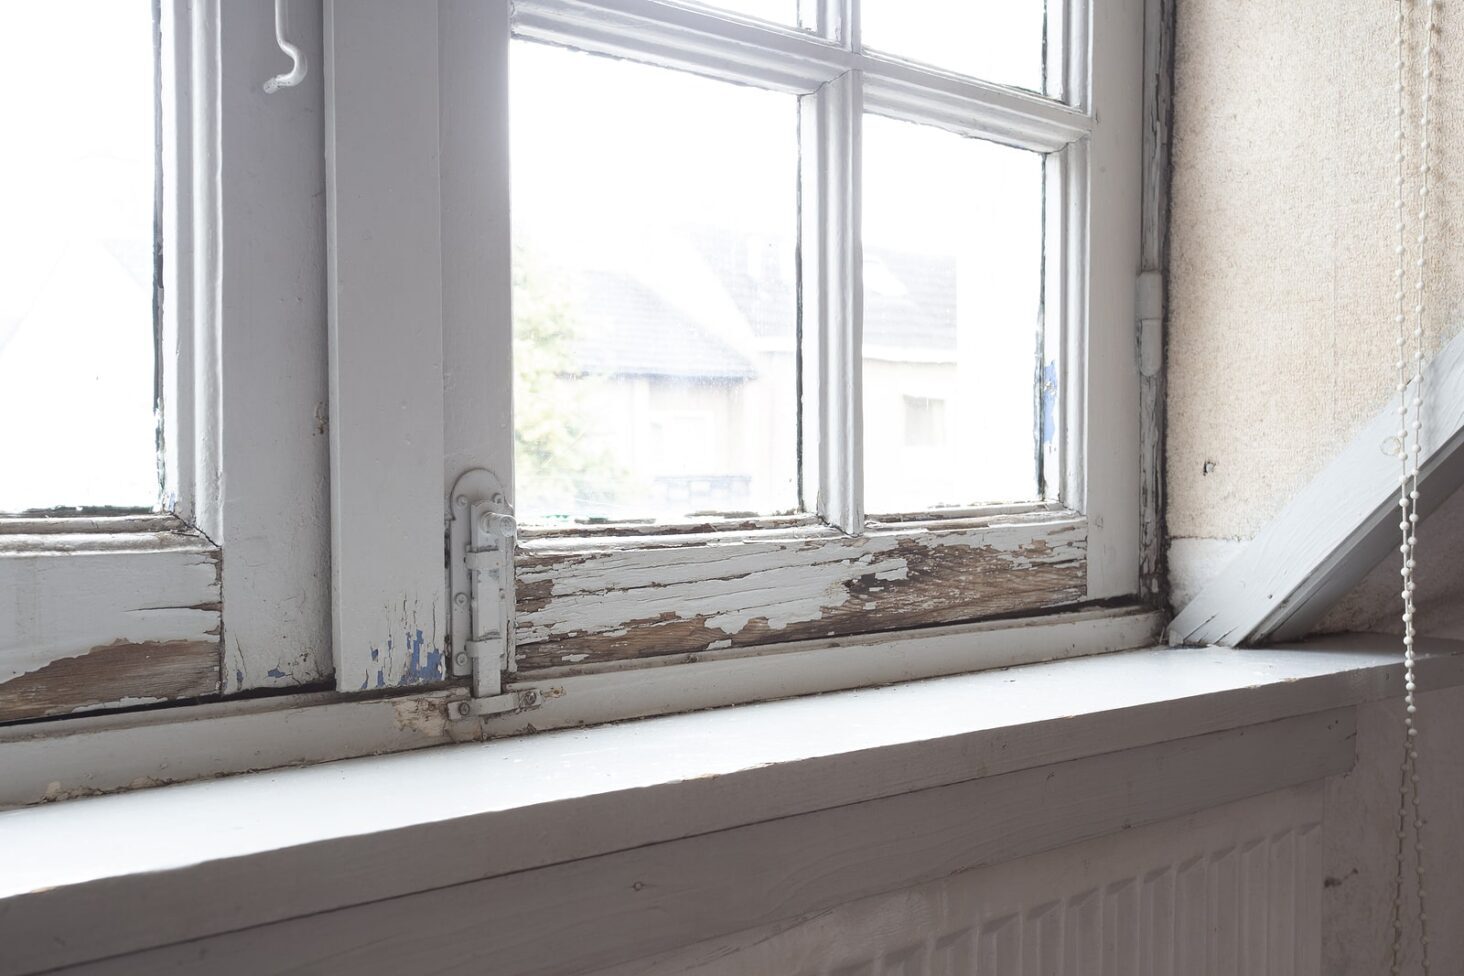 Dry rot damage to a window of a house